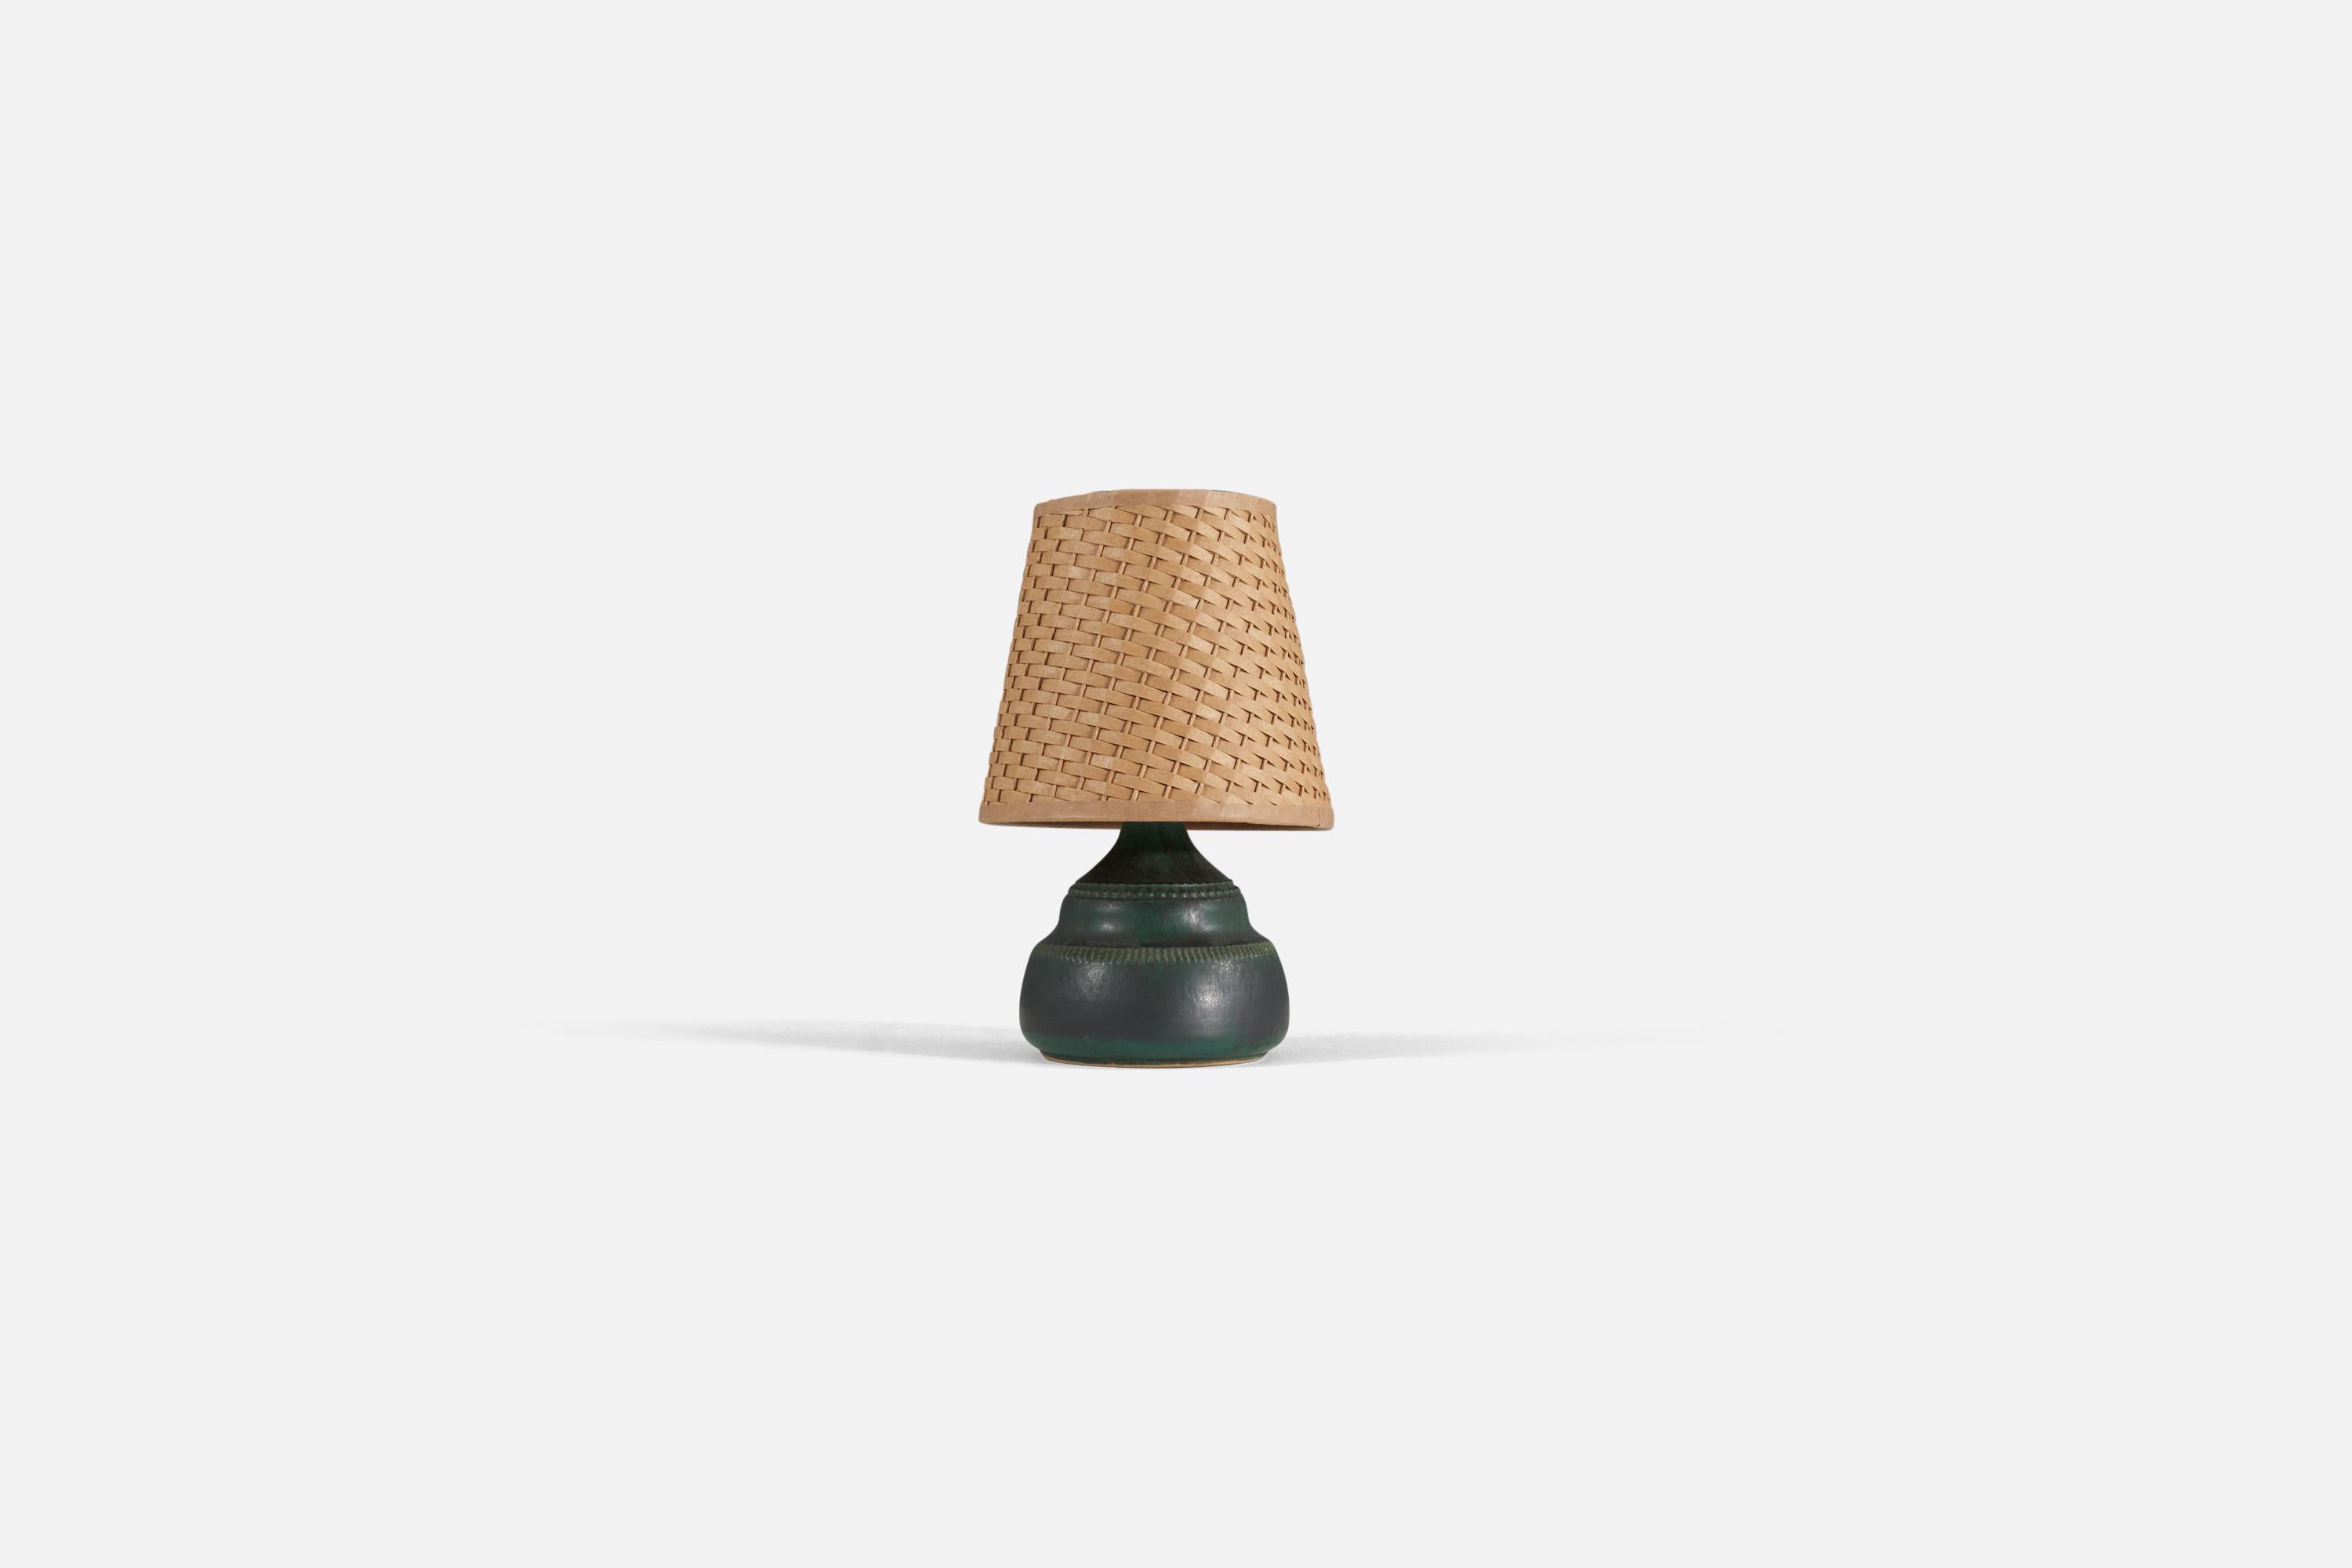 A green-glazed stoneware and rattan table lamp, produced by Klase Höganäs, Sweden, 1960s.

Measurements listed are of lamp. Upon request illustrated model lampshade can be included in purchase.

Shade : 4.25 x 6.25 x 6
Lamp with shade : 9.75 x